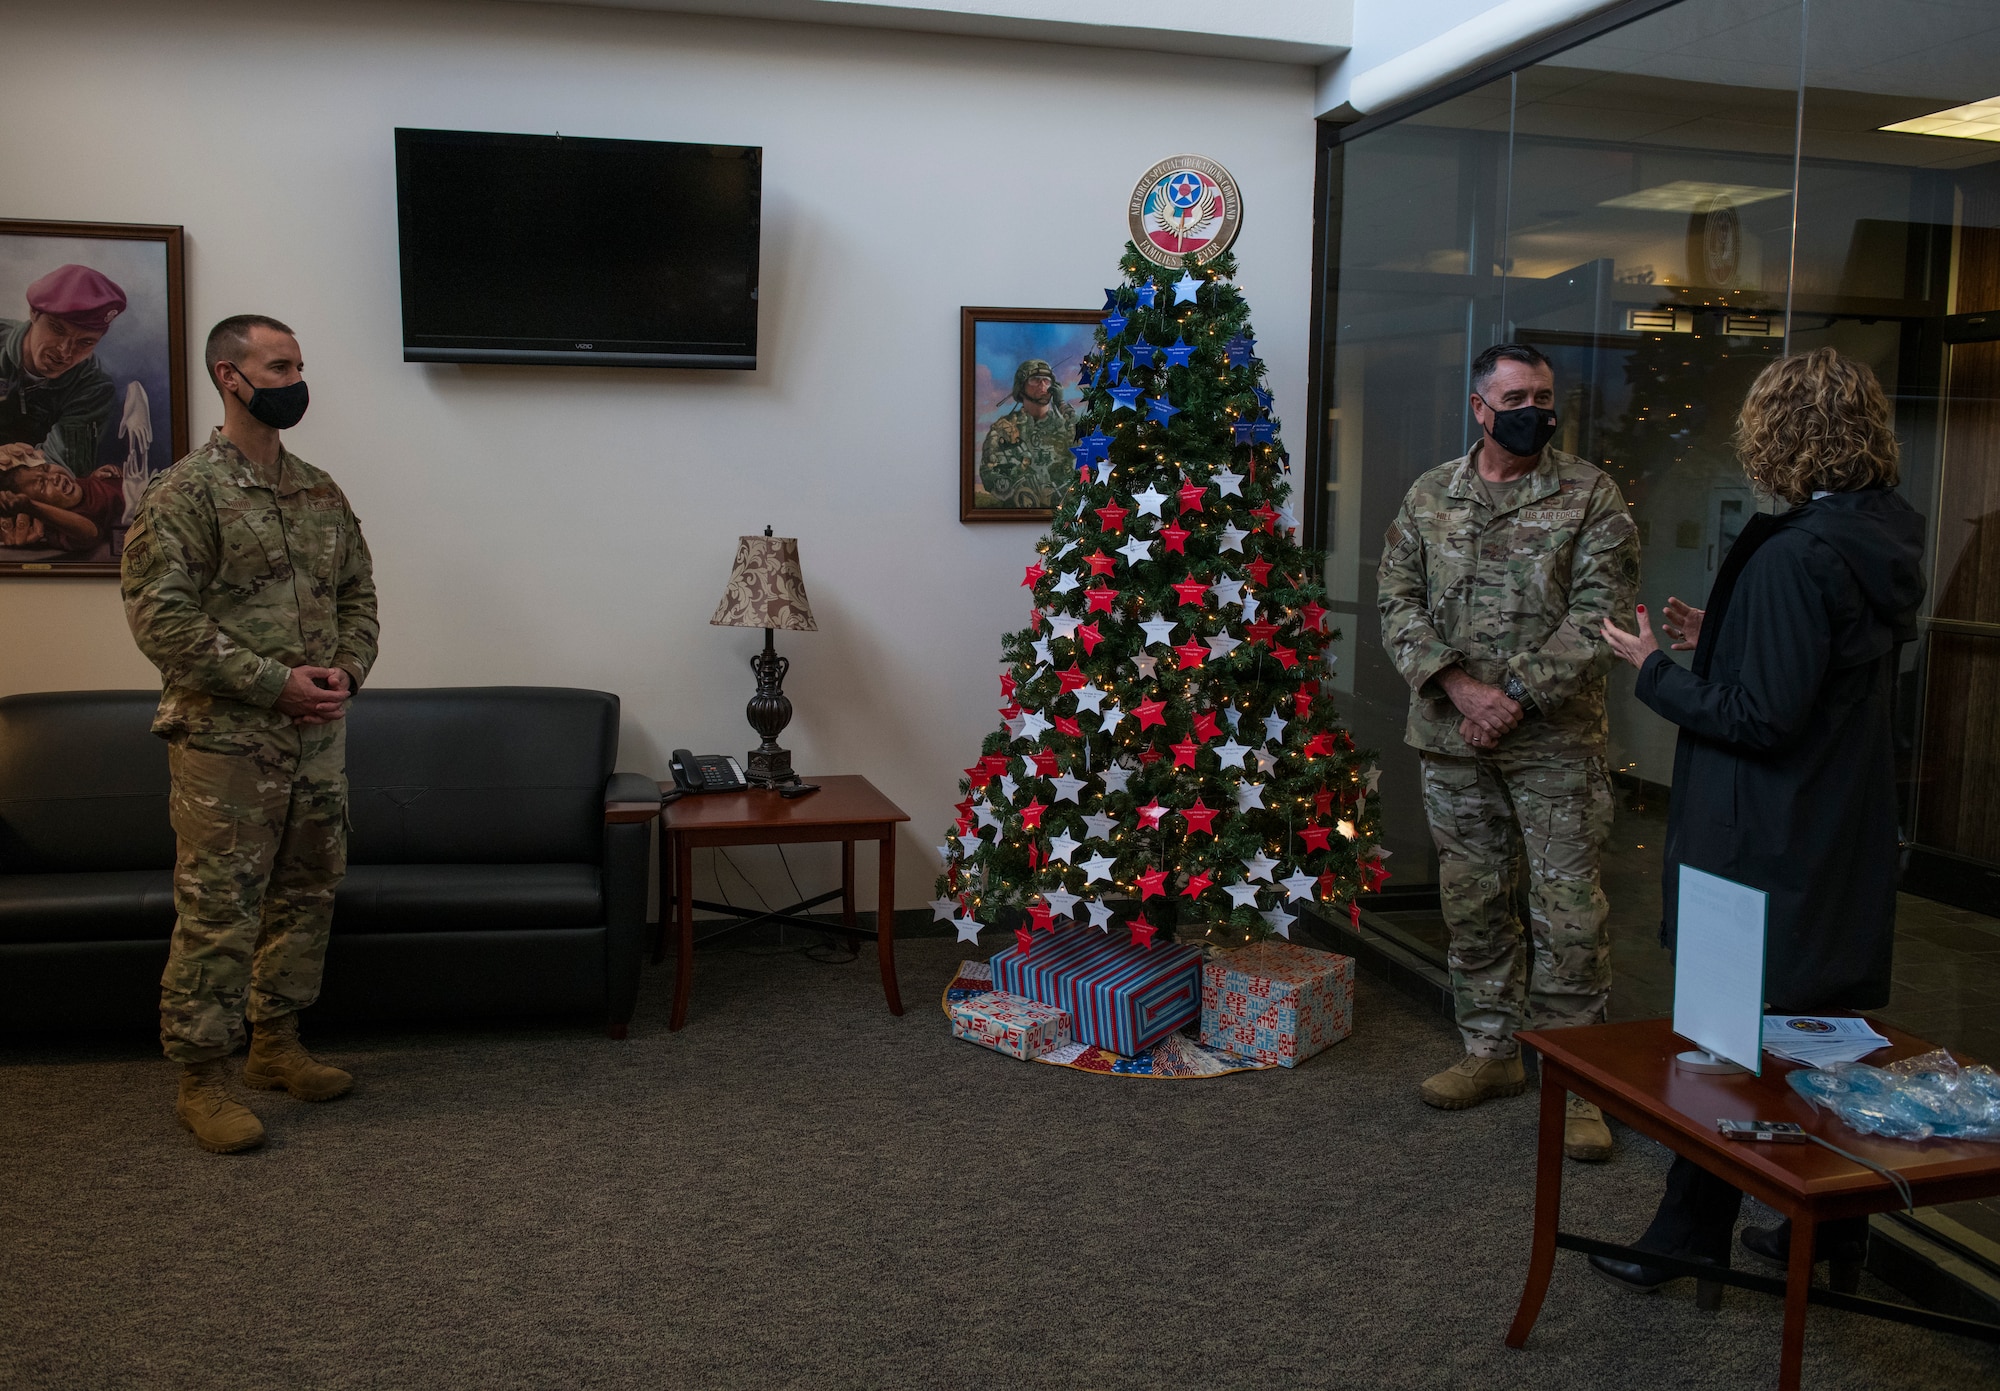 Leadership with HQ AFSOC, 1st Special Operations Wing and 24th SOW, carried on a holiday tradition by placing red, white and blue stars to honor 365 fallen Airmen.